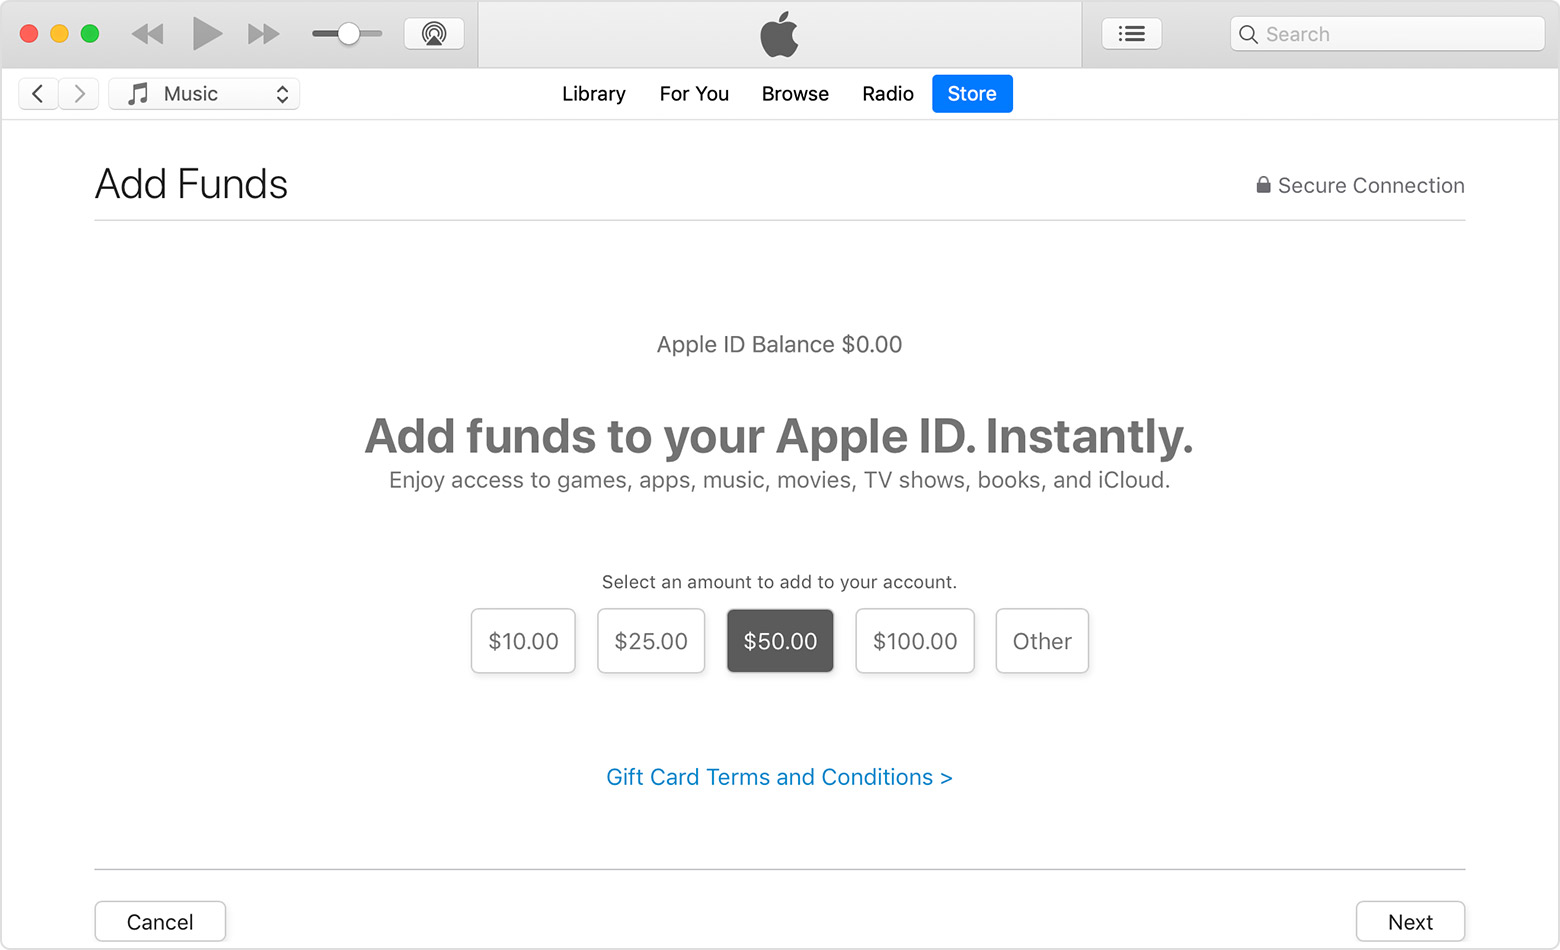 An iTunes Store window open to the "Add funds to your Apple ID" screen.